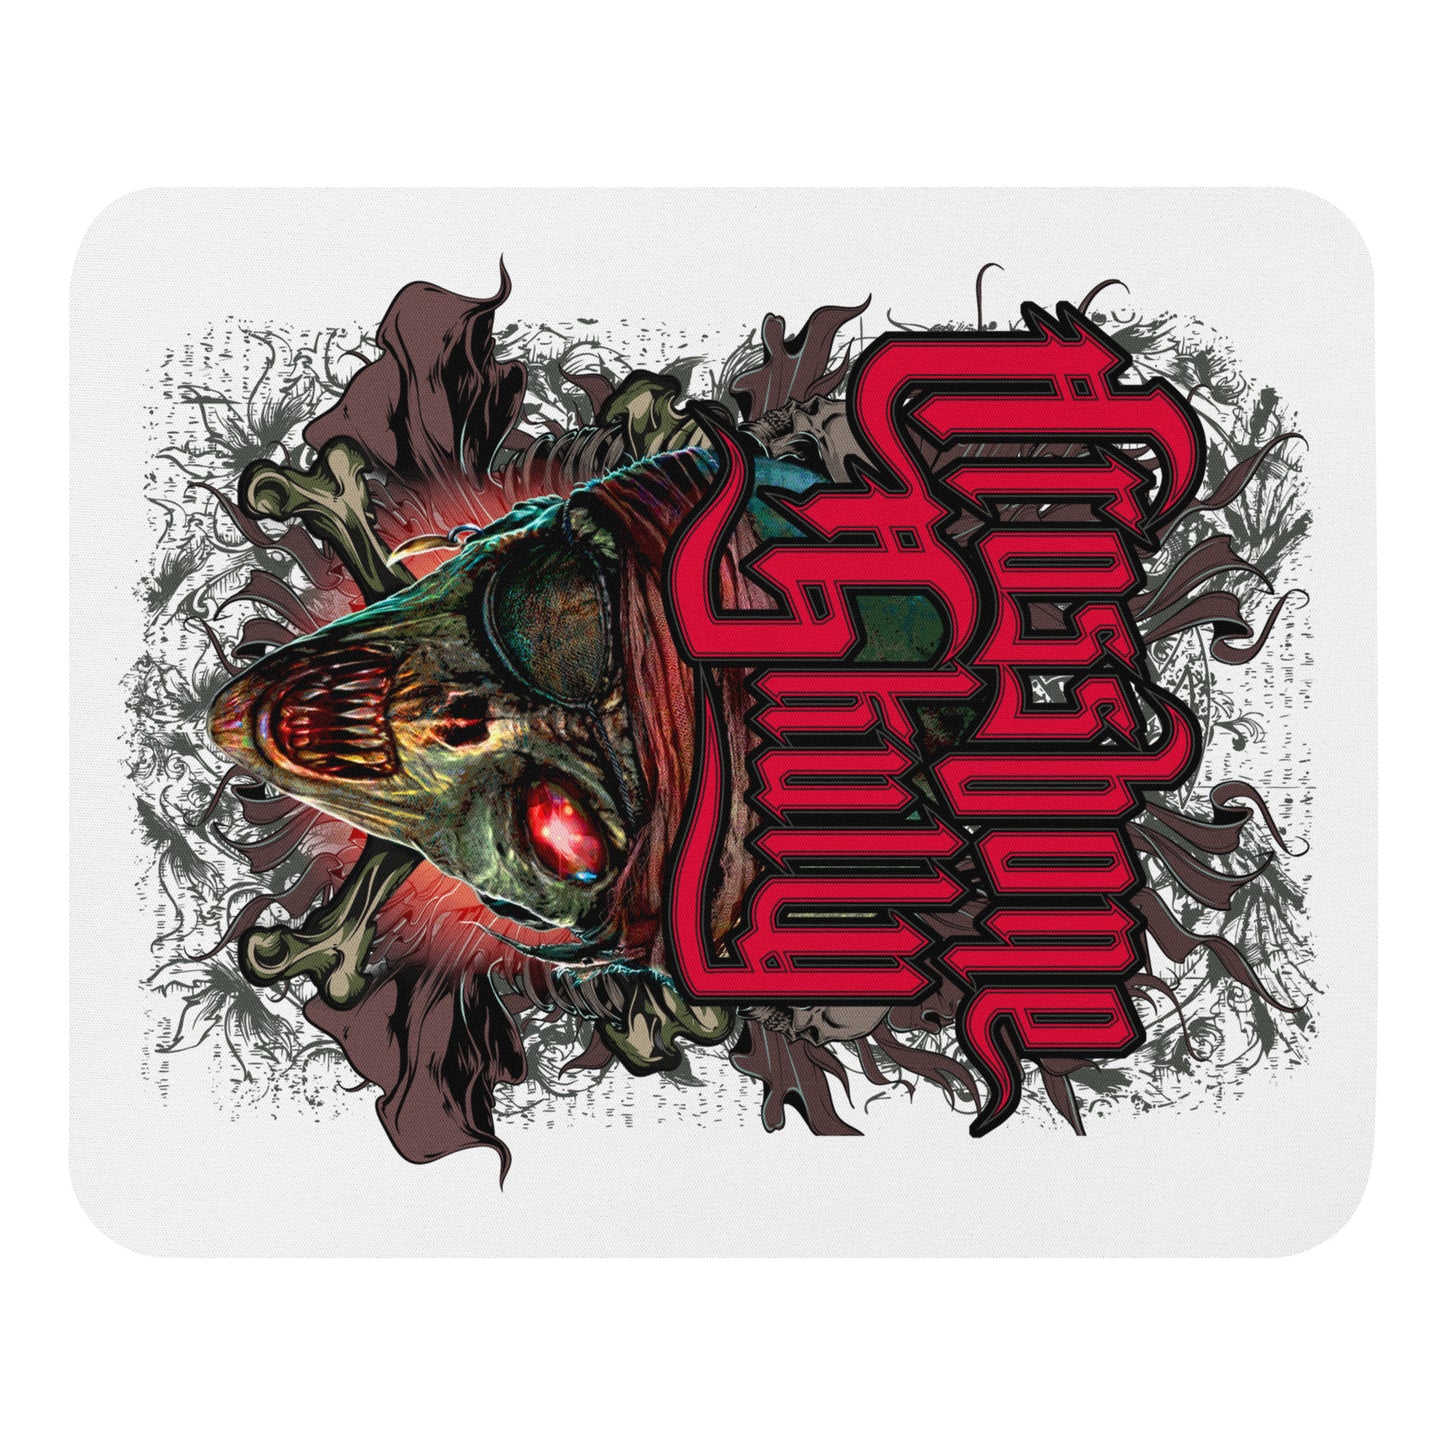 Limited Edition Skully Mouse pad